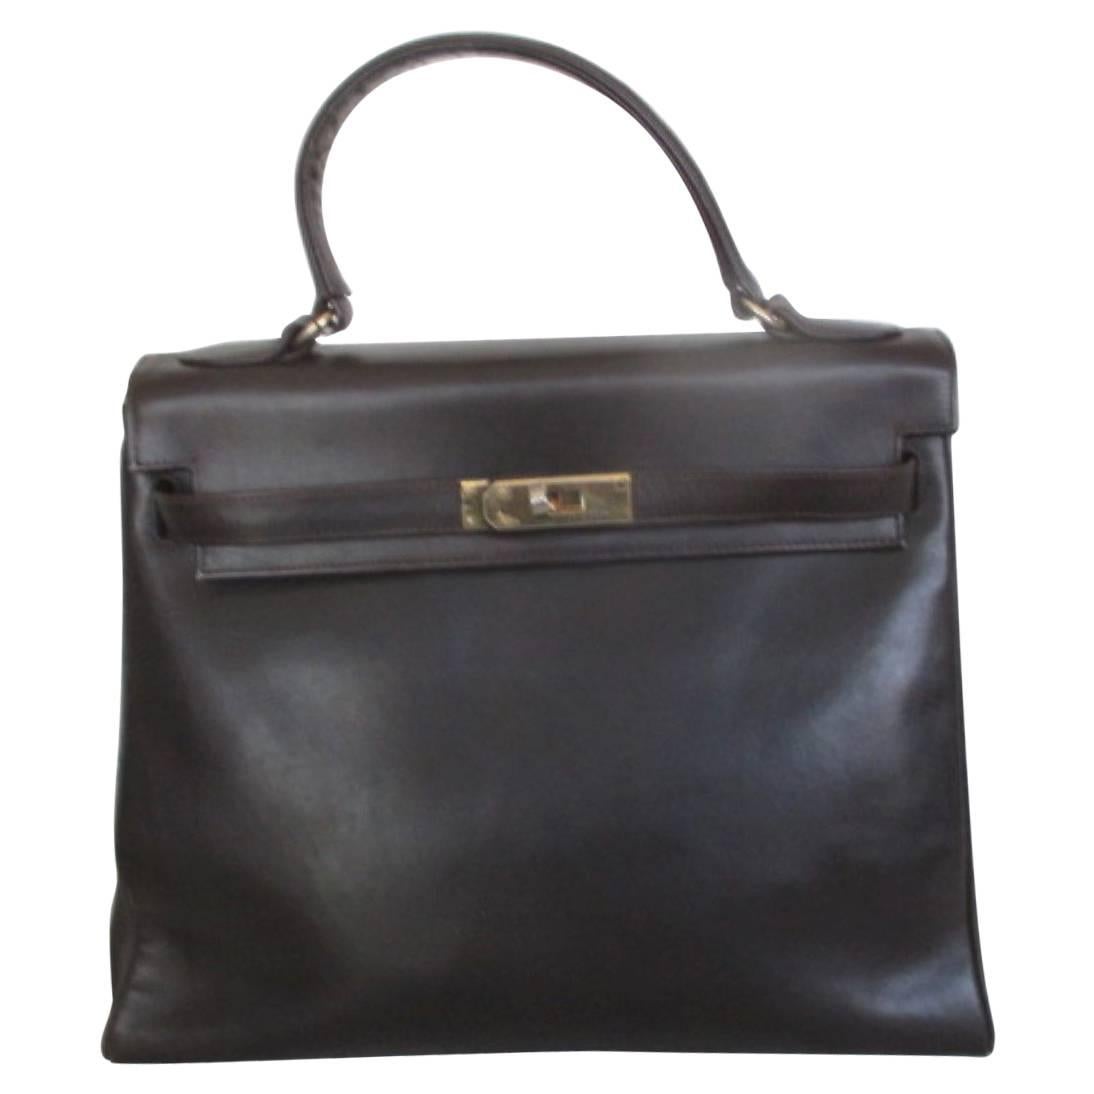 brown vintage leather bag with gold hardware